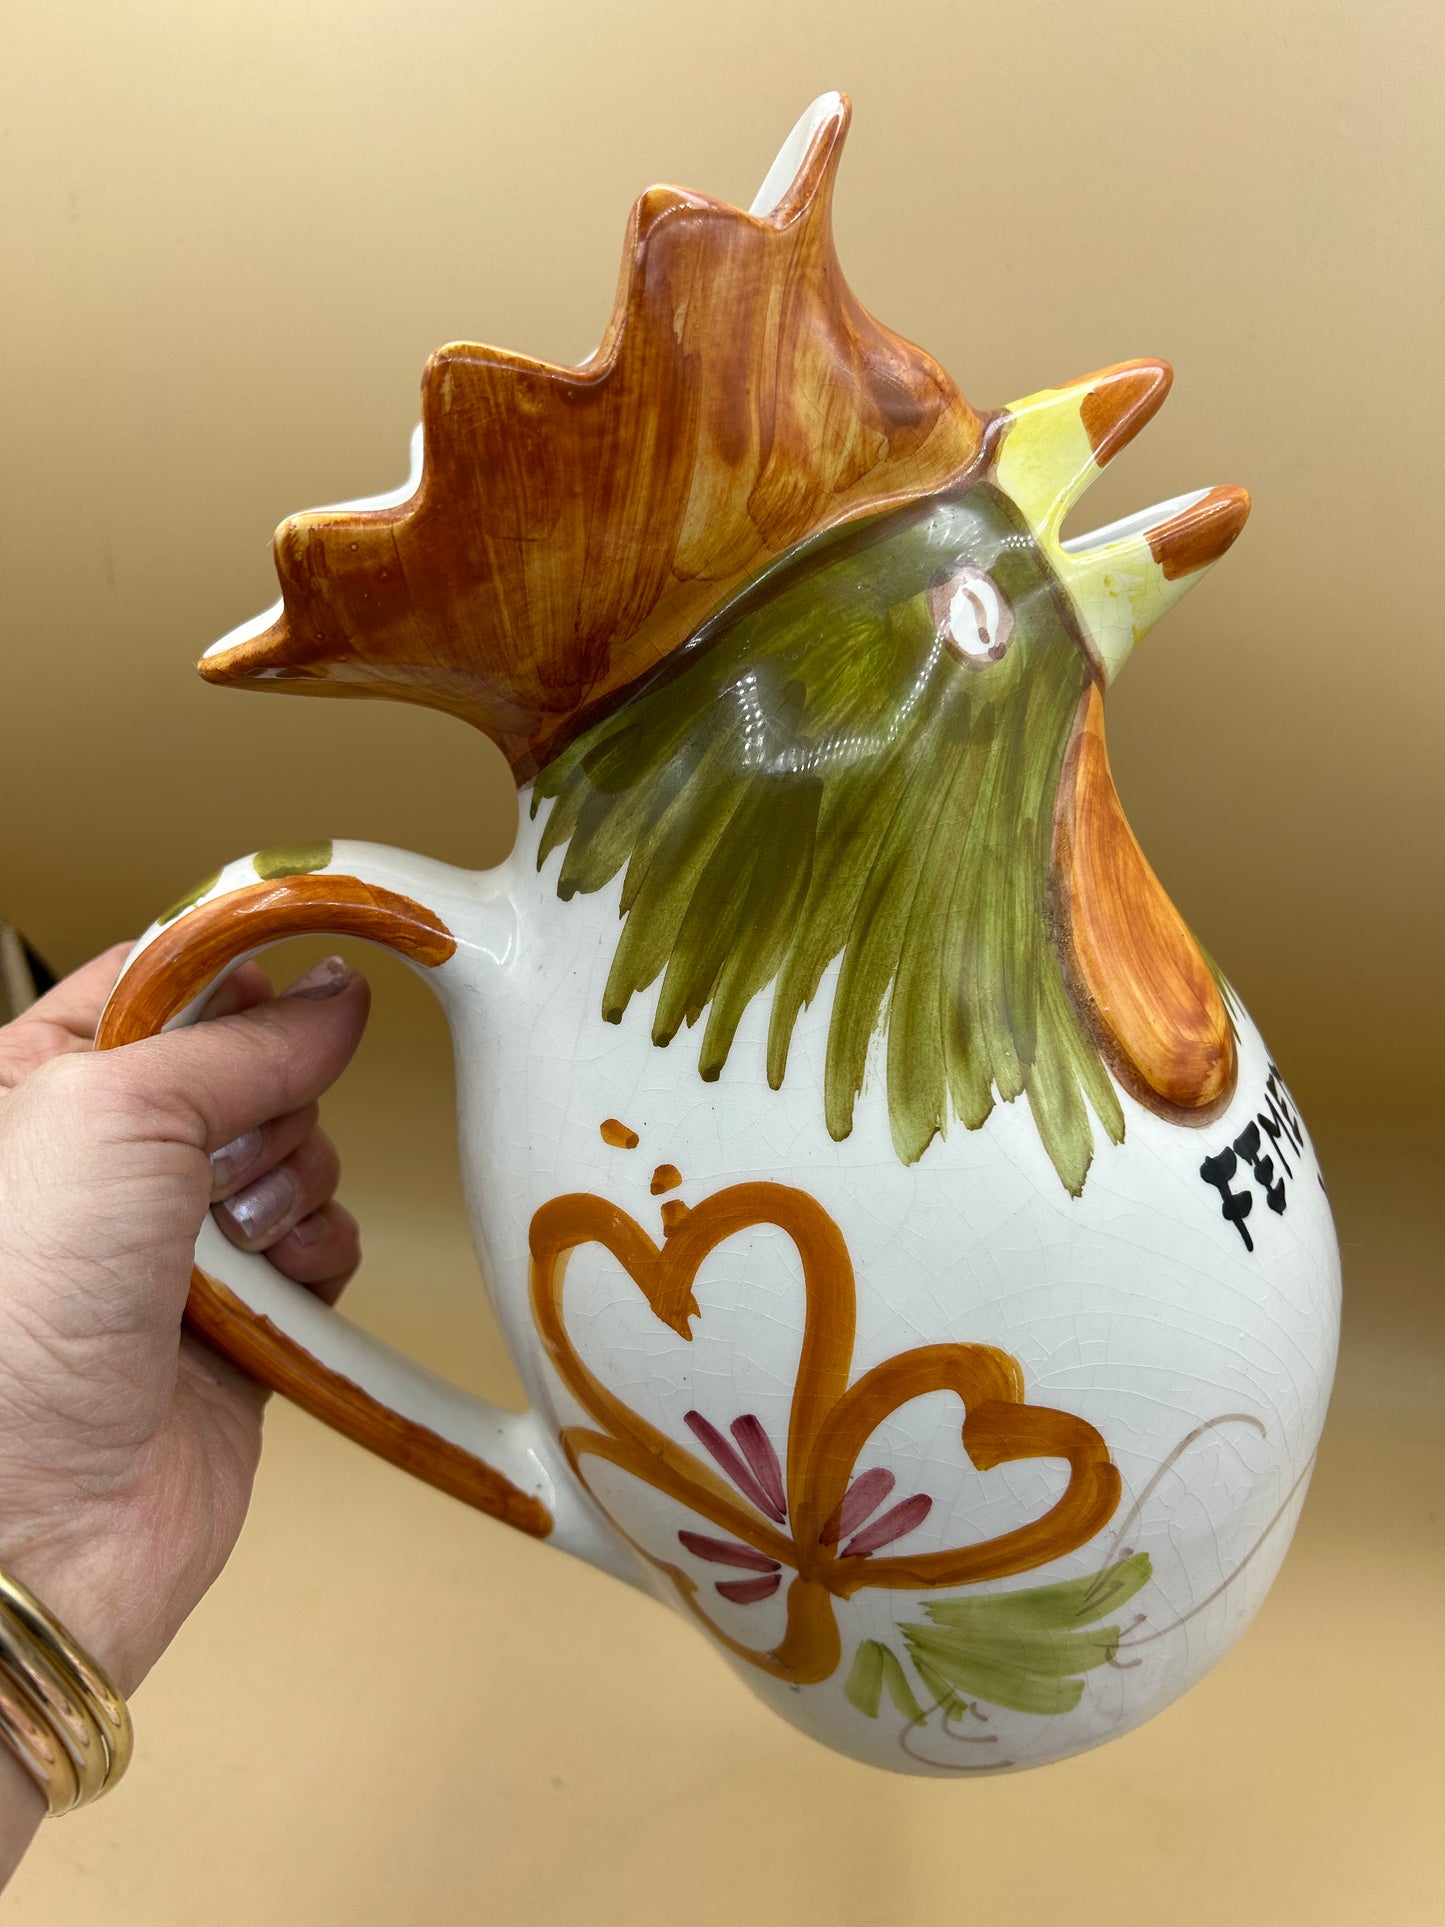 Hand-painted Bassano ceramic jug with rooster